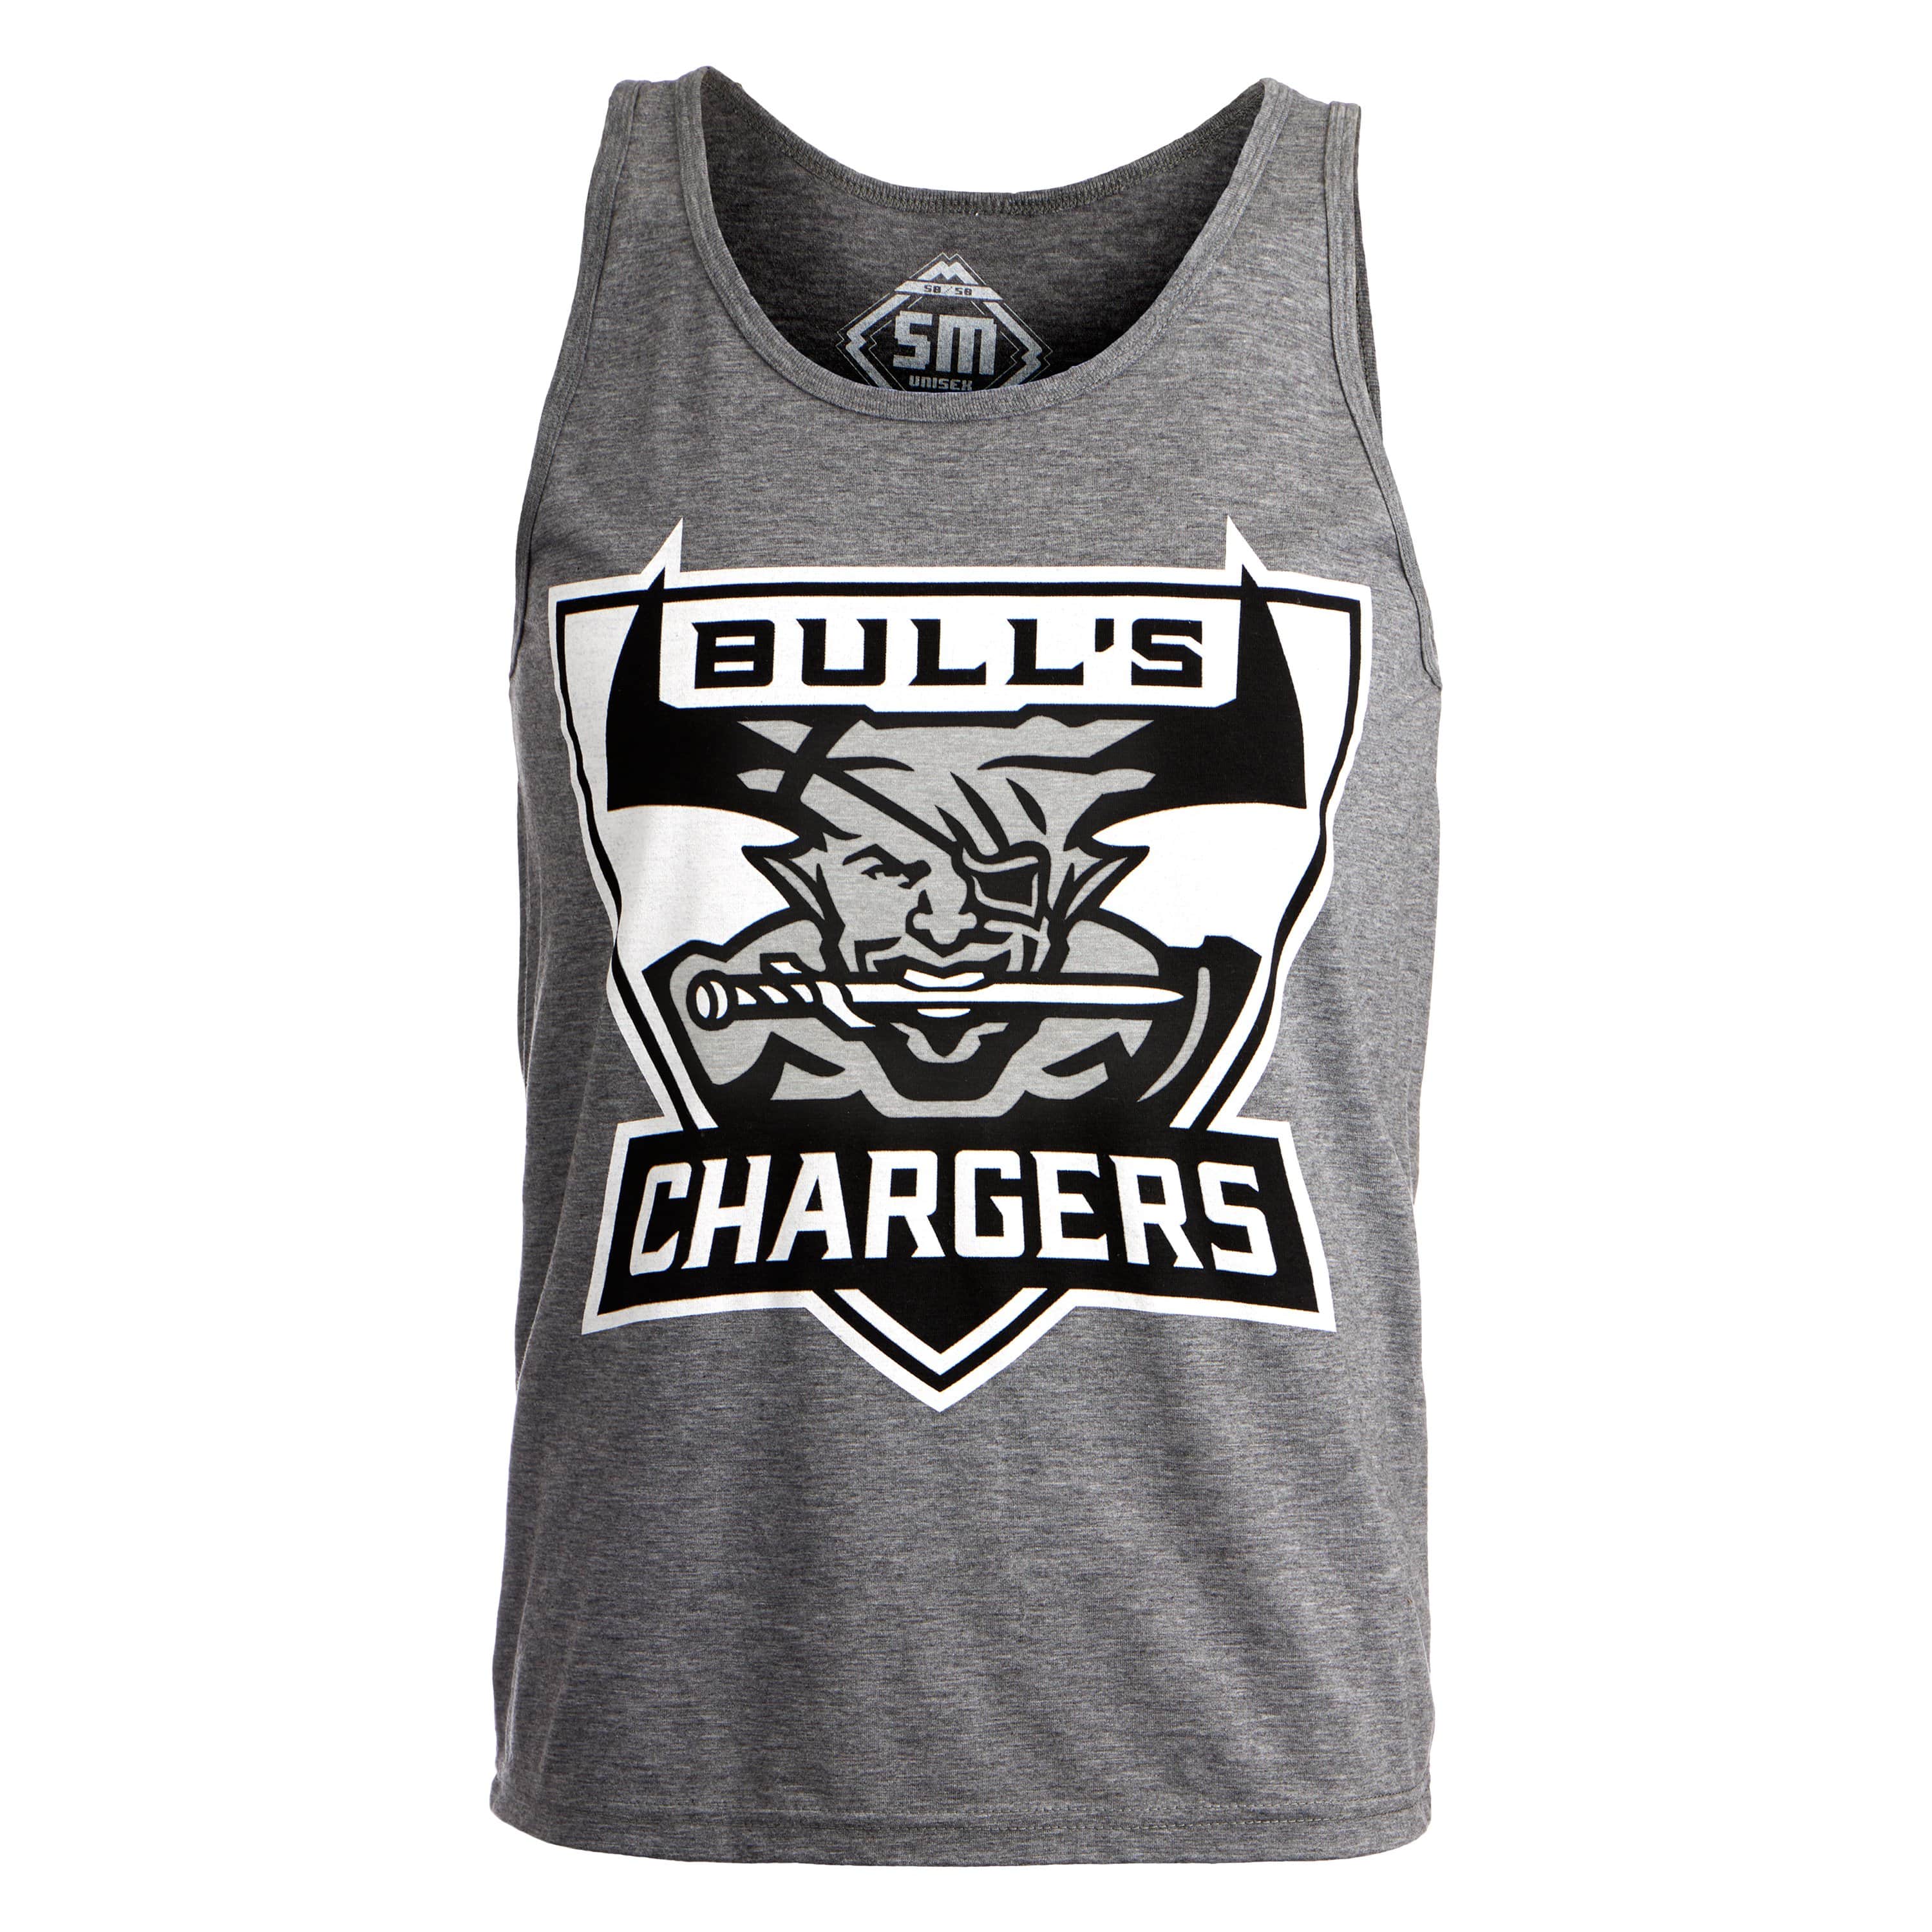 Dragon Age: Inquisition - Bull's Chargers Poly-Blend Heather Tank